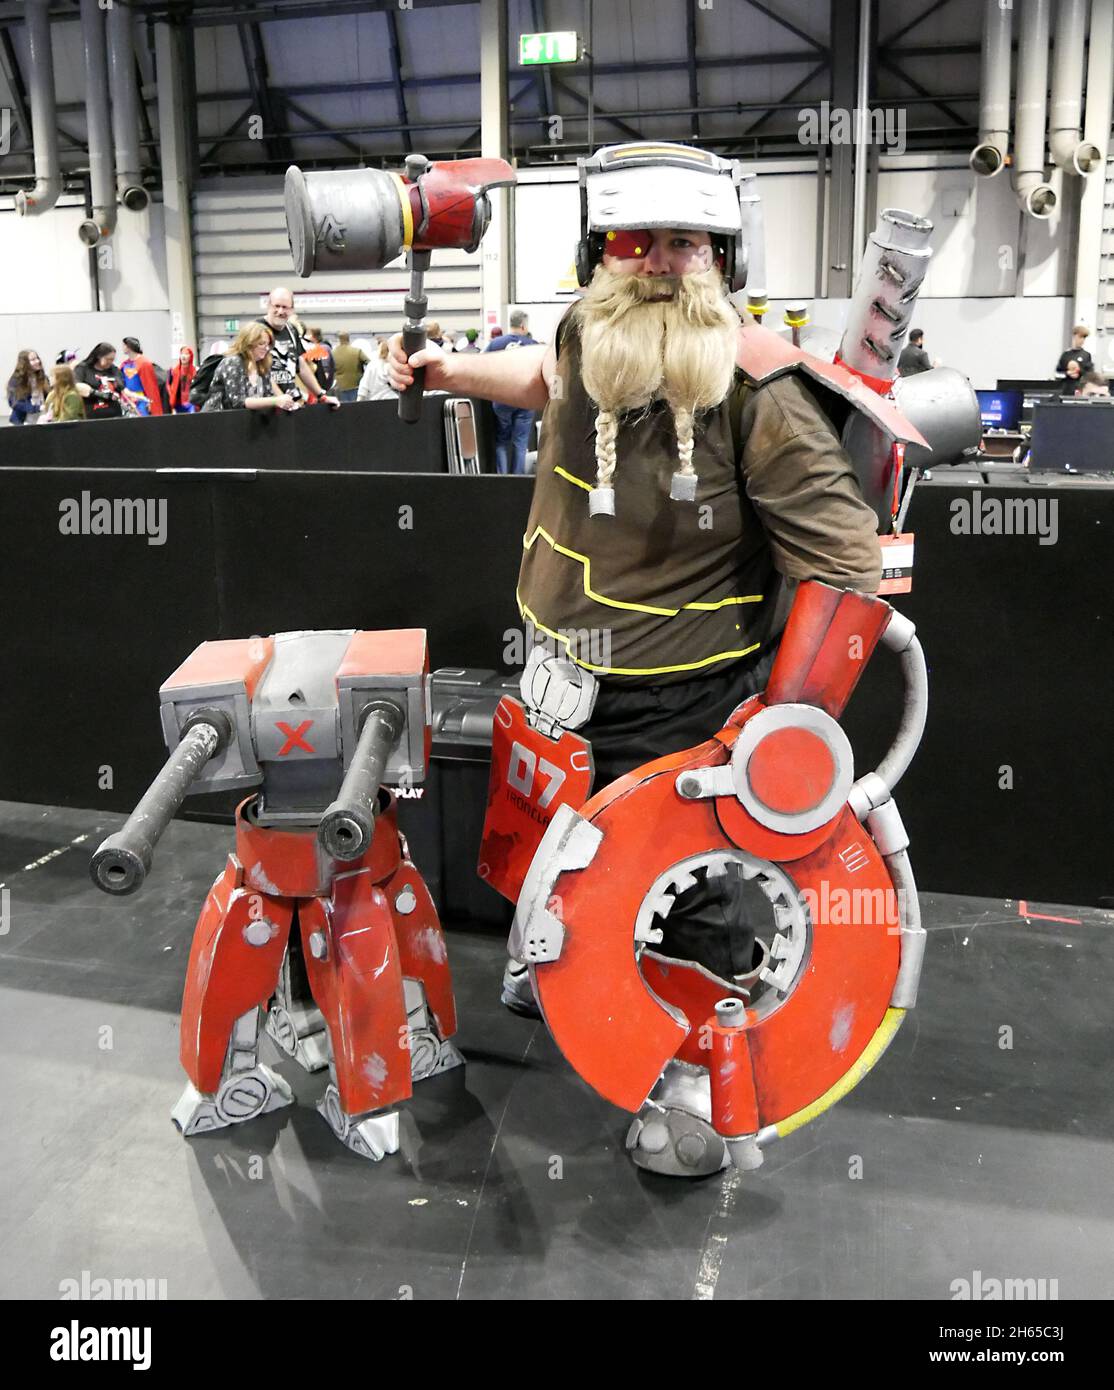 Birmingham, UK. 13th Nov, 2021. Cosplayer dressed as Torbjörn from the video game OverWatch during the MCM Comic Con, held at the NEC Birmingham on Saturday November 13th, 2021. Photo credit should read: James Warwick/Alamy Live. Credit: James Warwick/Alamy Live News Stock Photo